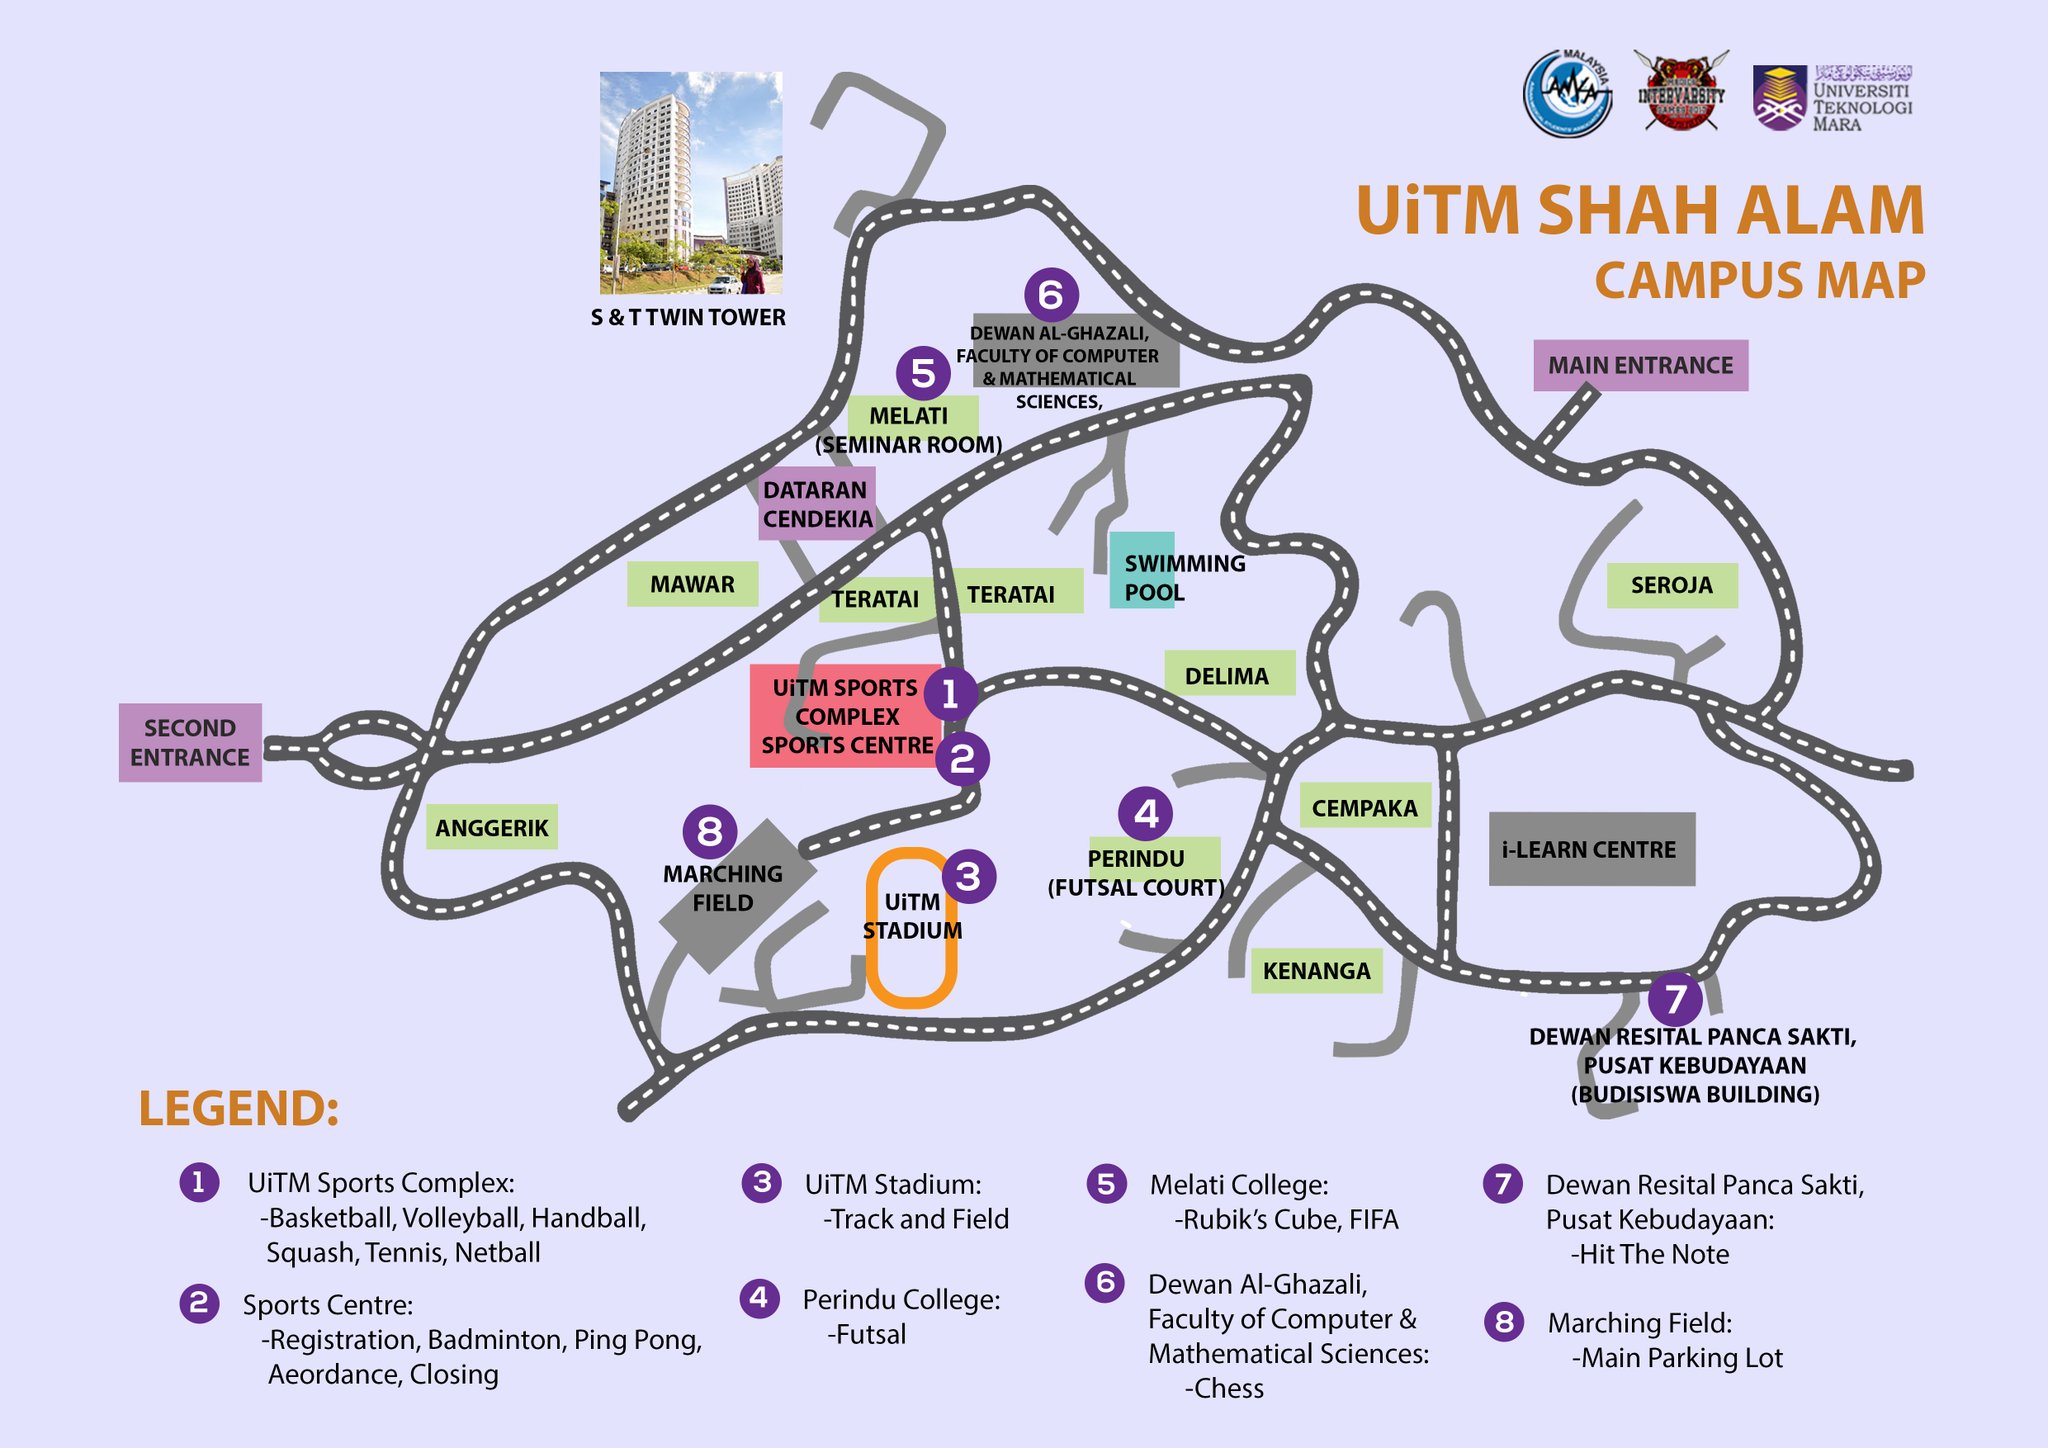 Mivg 17 On Twitter Here Are Some Guides For The Venue Of The Games In Uitm Shah Alam Campus Mivg2017 Amsamalaysia Amsauitm Https T Co 9wk0wfzit6 Twitter